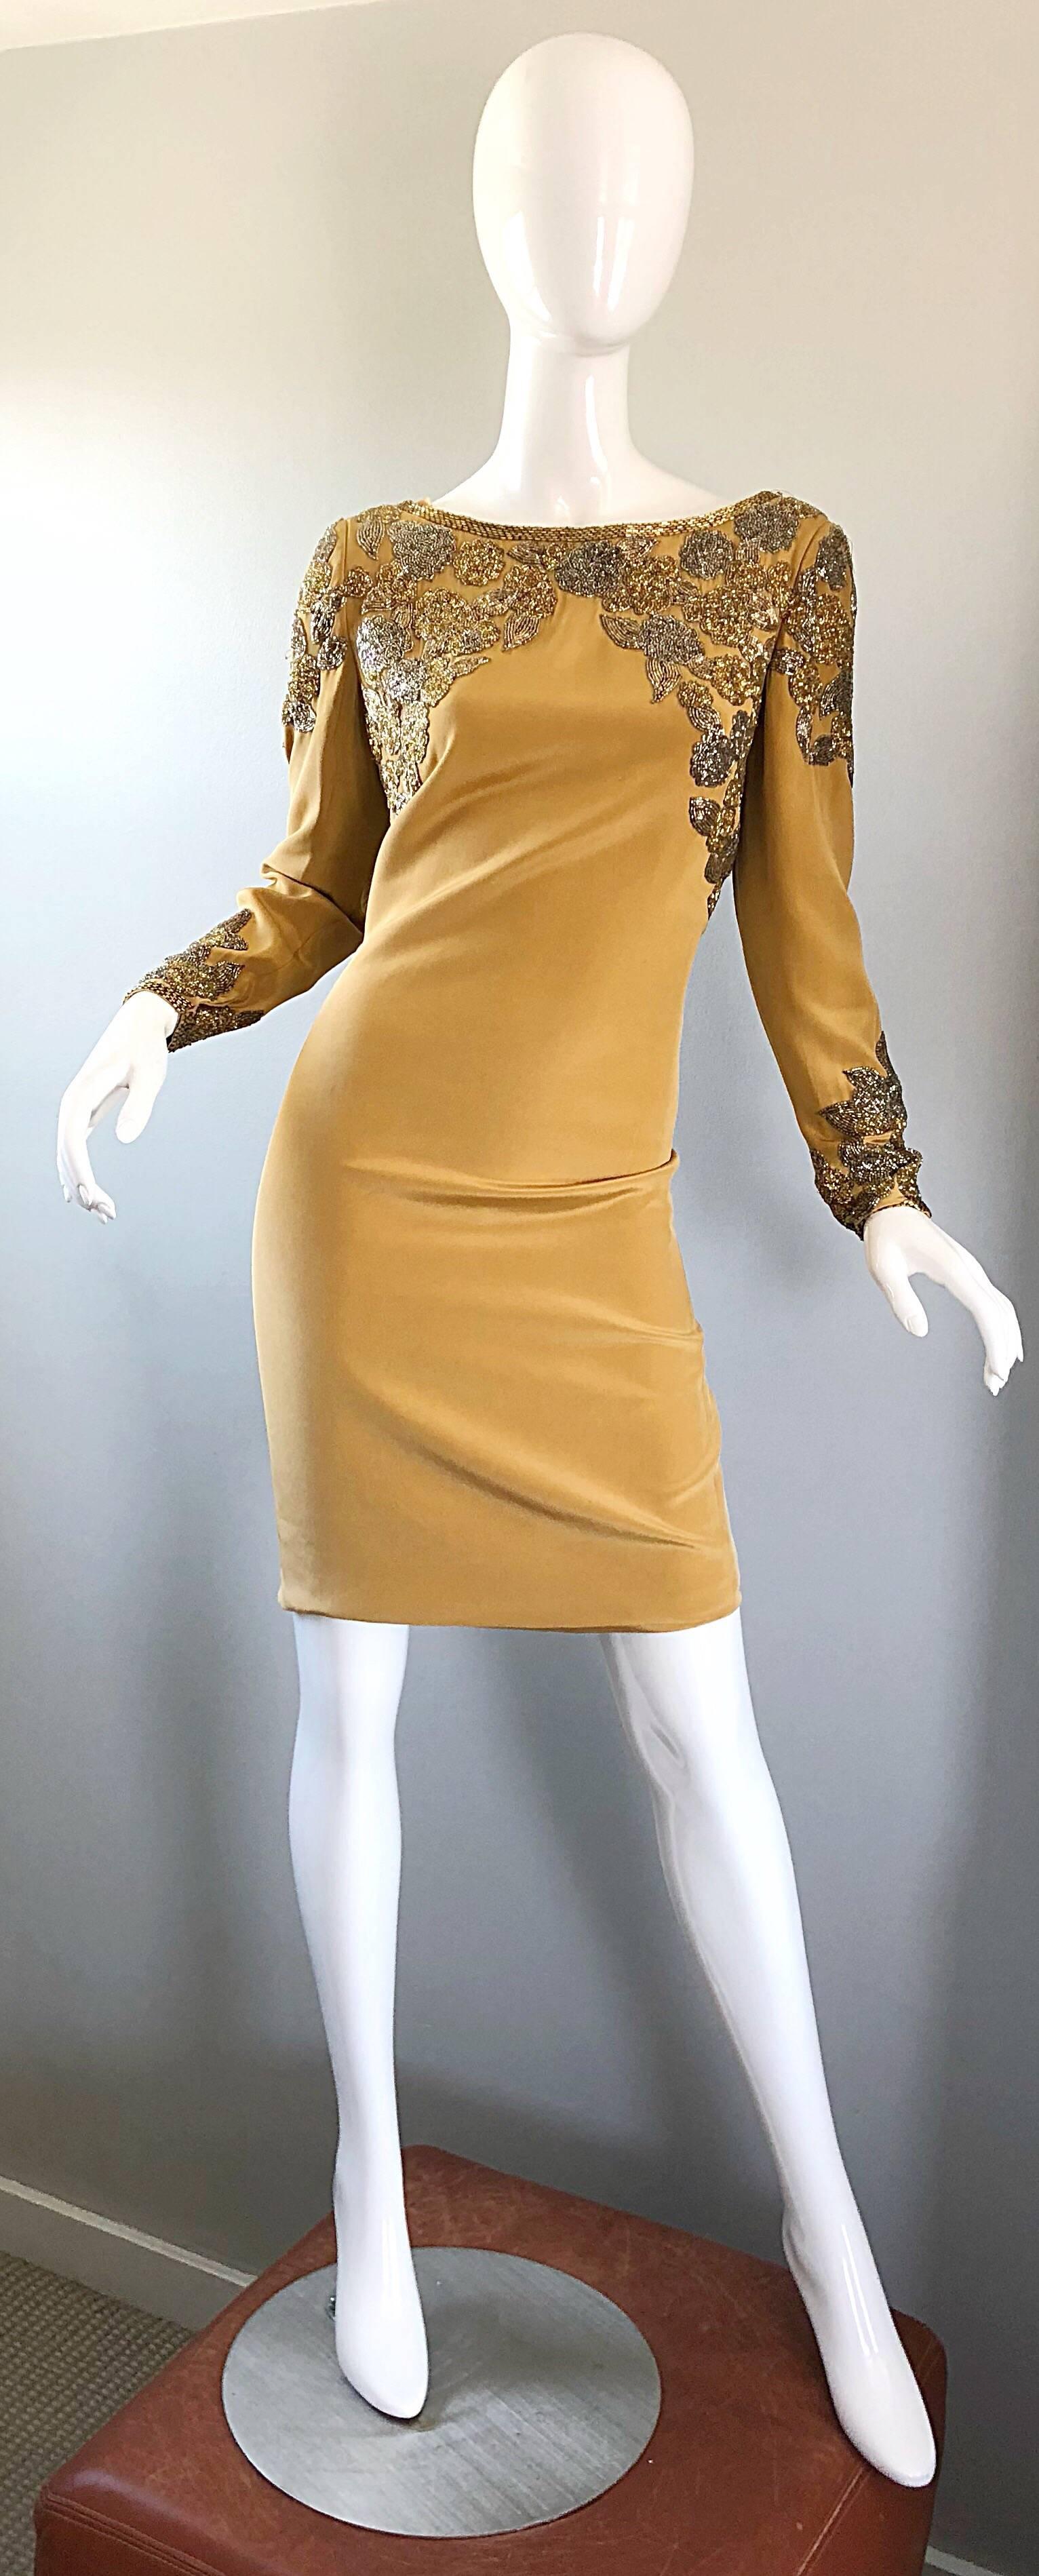 Beautiful 1990s OLEG CASSINI gold beaded silk dress! Features thousands of hand-sewn gold and silver seed beads along the top front and back bust and sleeves. Wonderful tailored fit, with sleek long sleeves. Hidden zipper up the back with